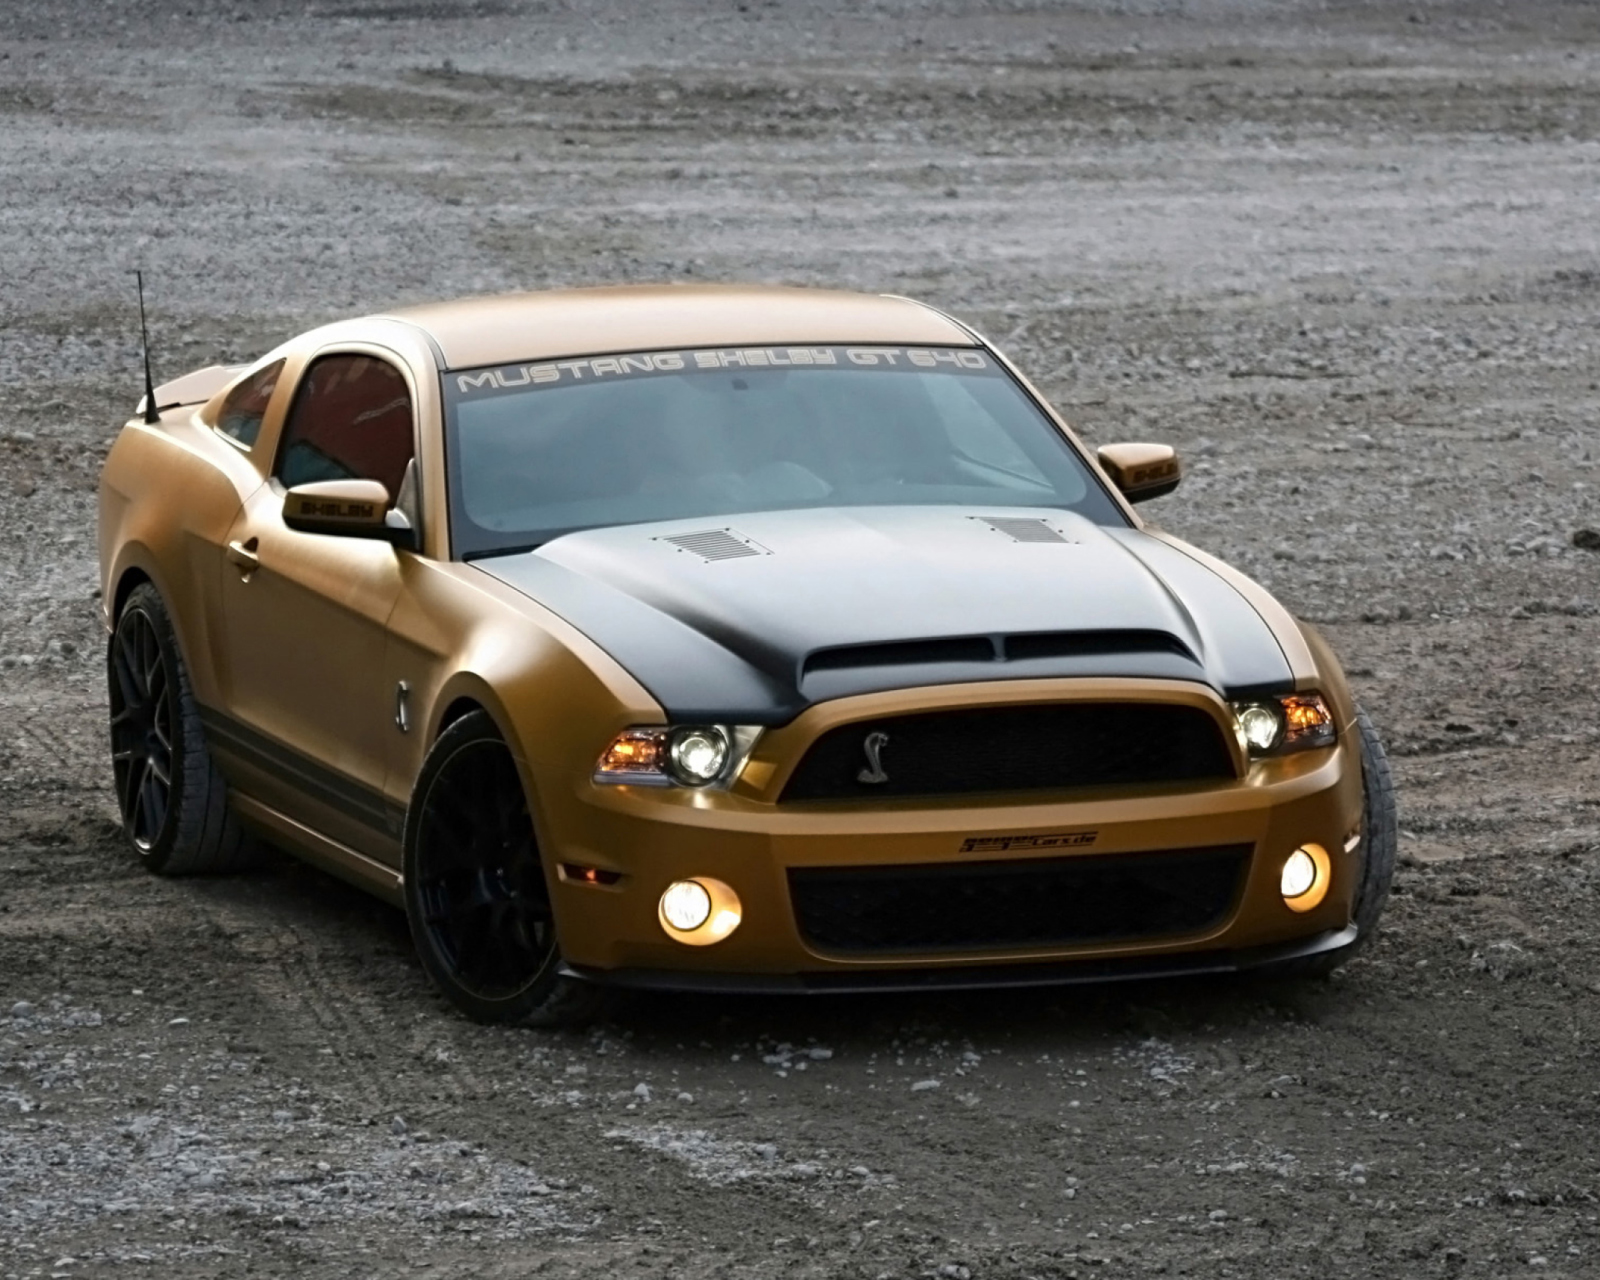 Das Ford Mustang Shelby GT640 Wallpaper 1600x1280